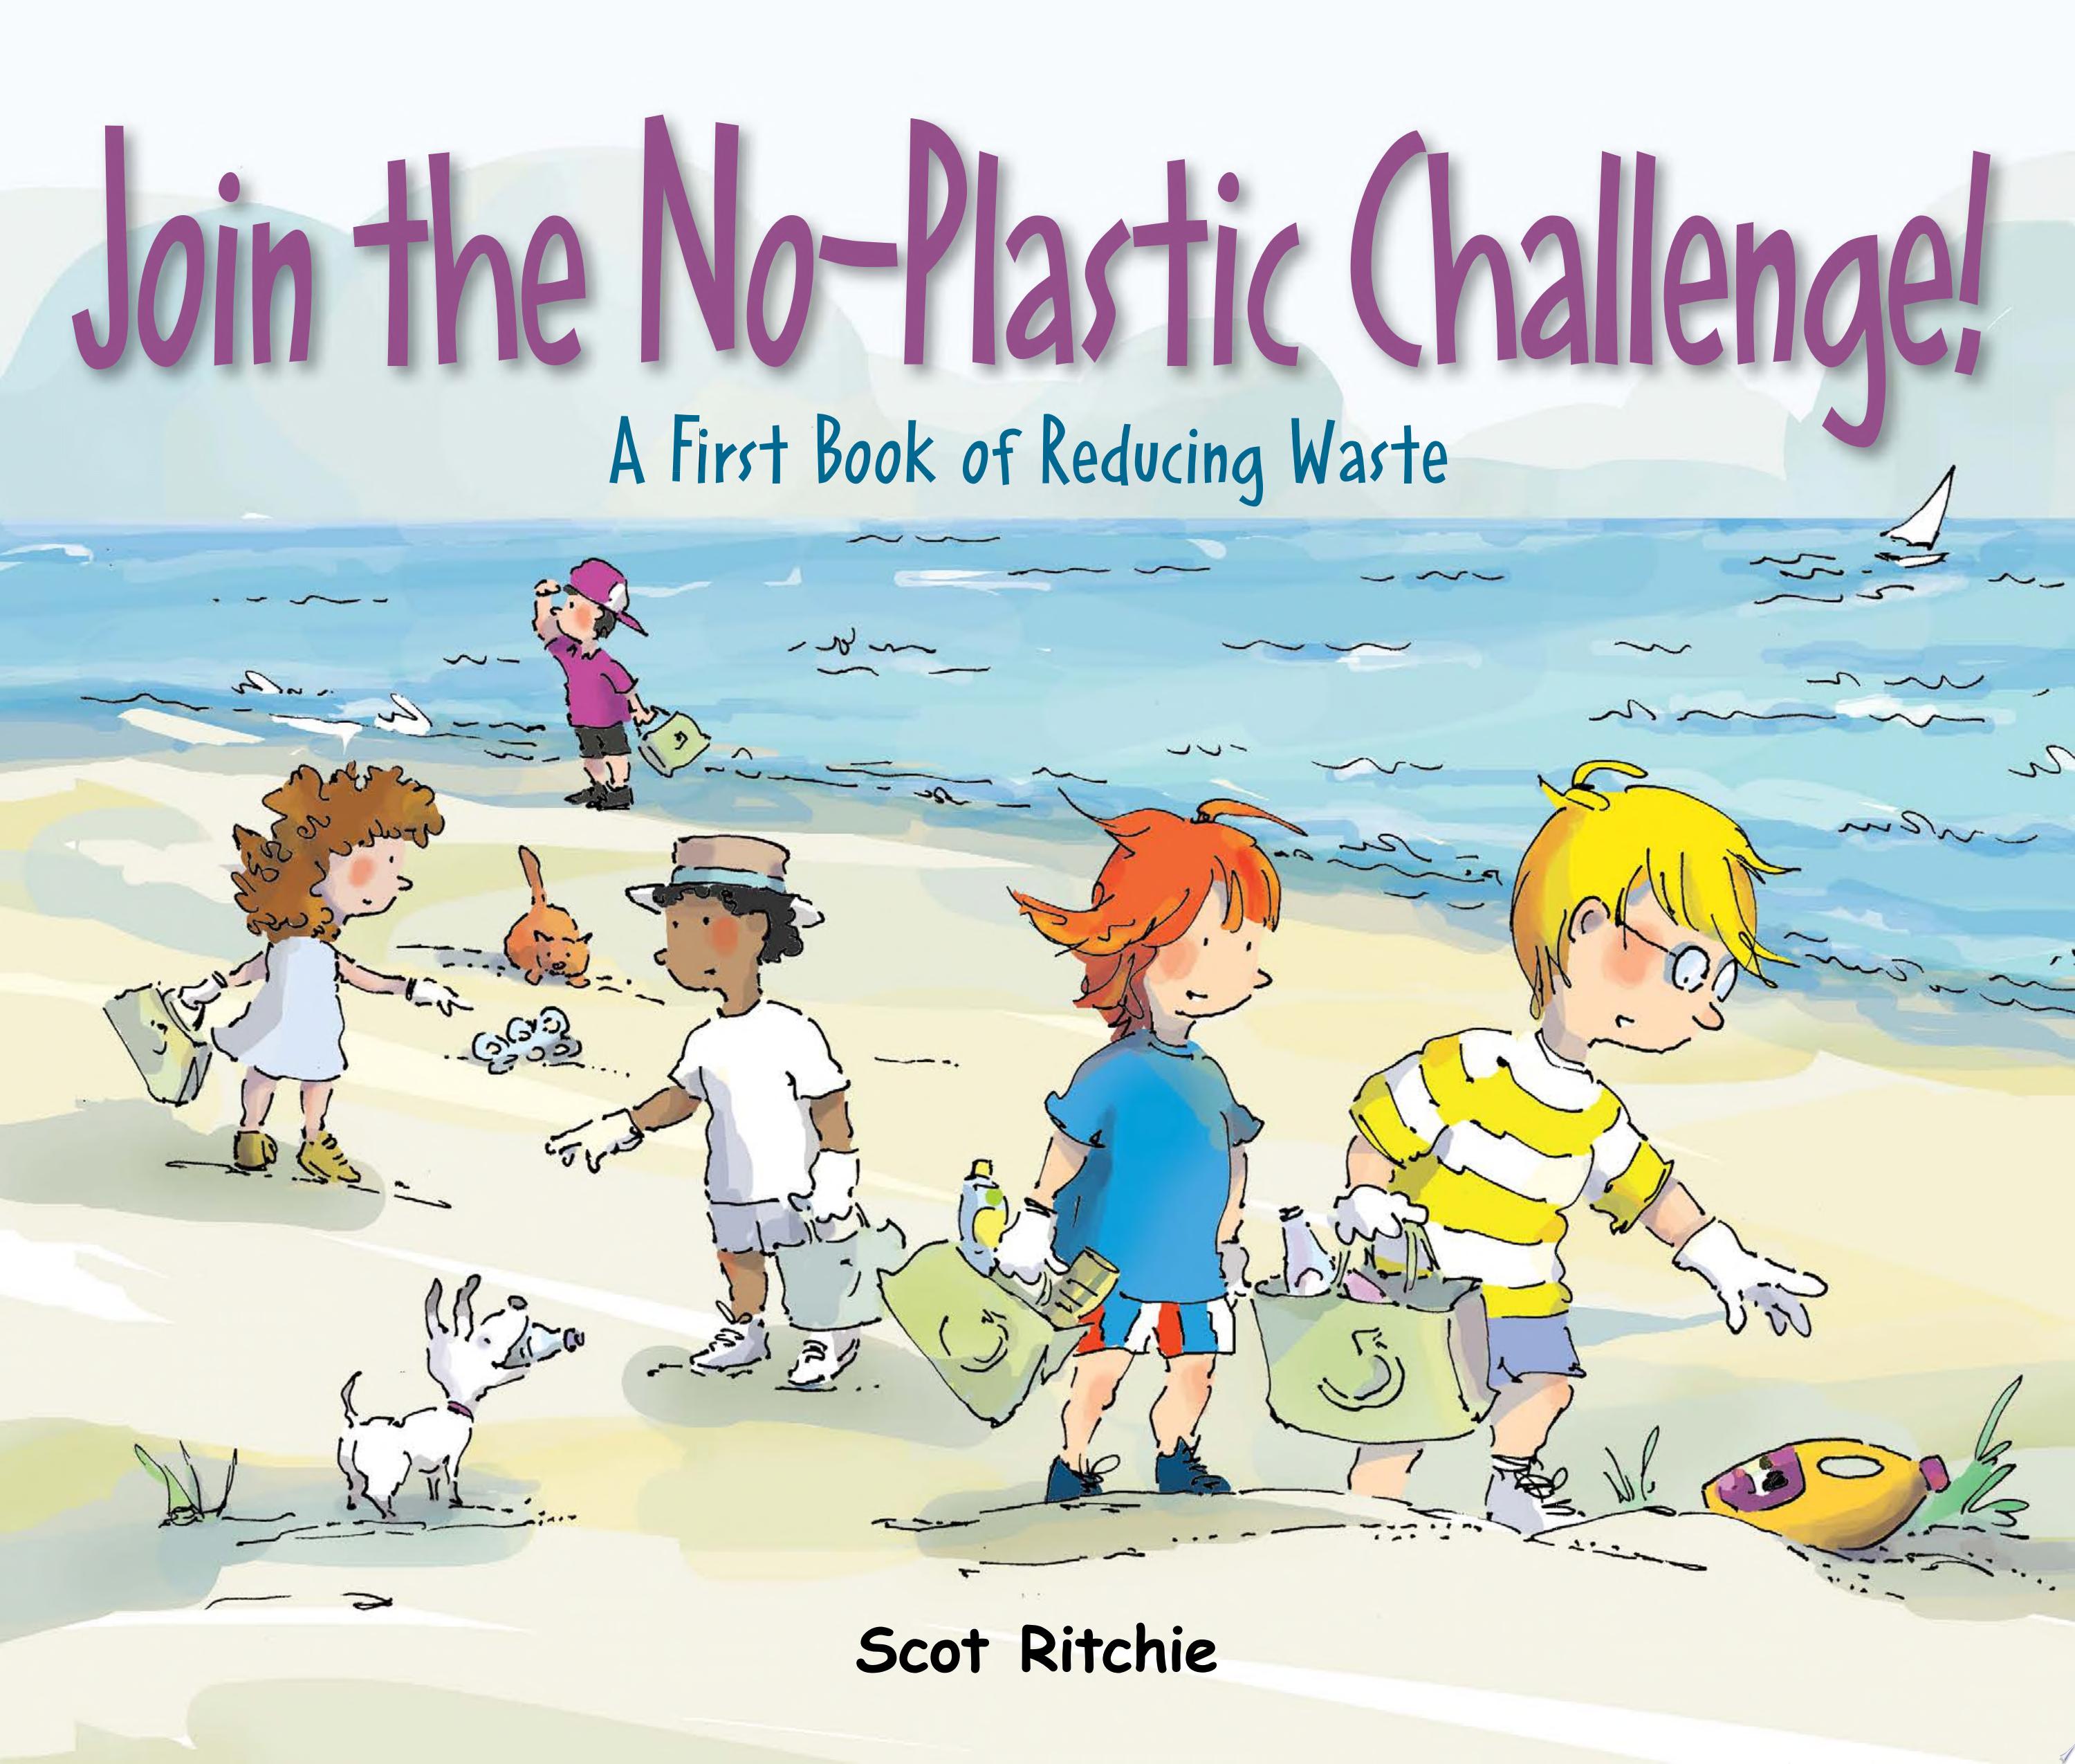 Image for "Join the No-Plastic Challenge!"